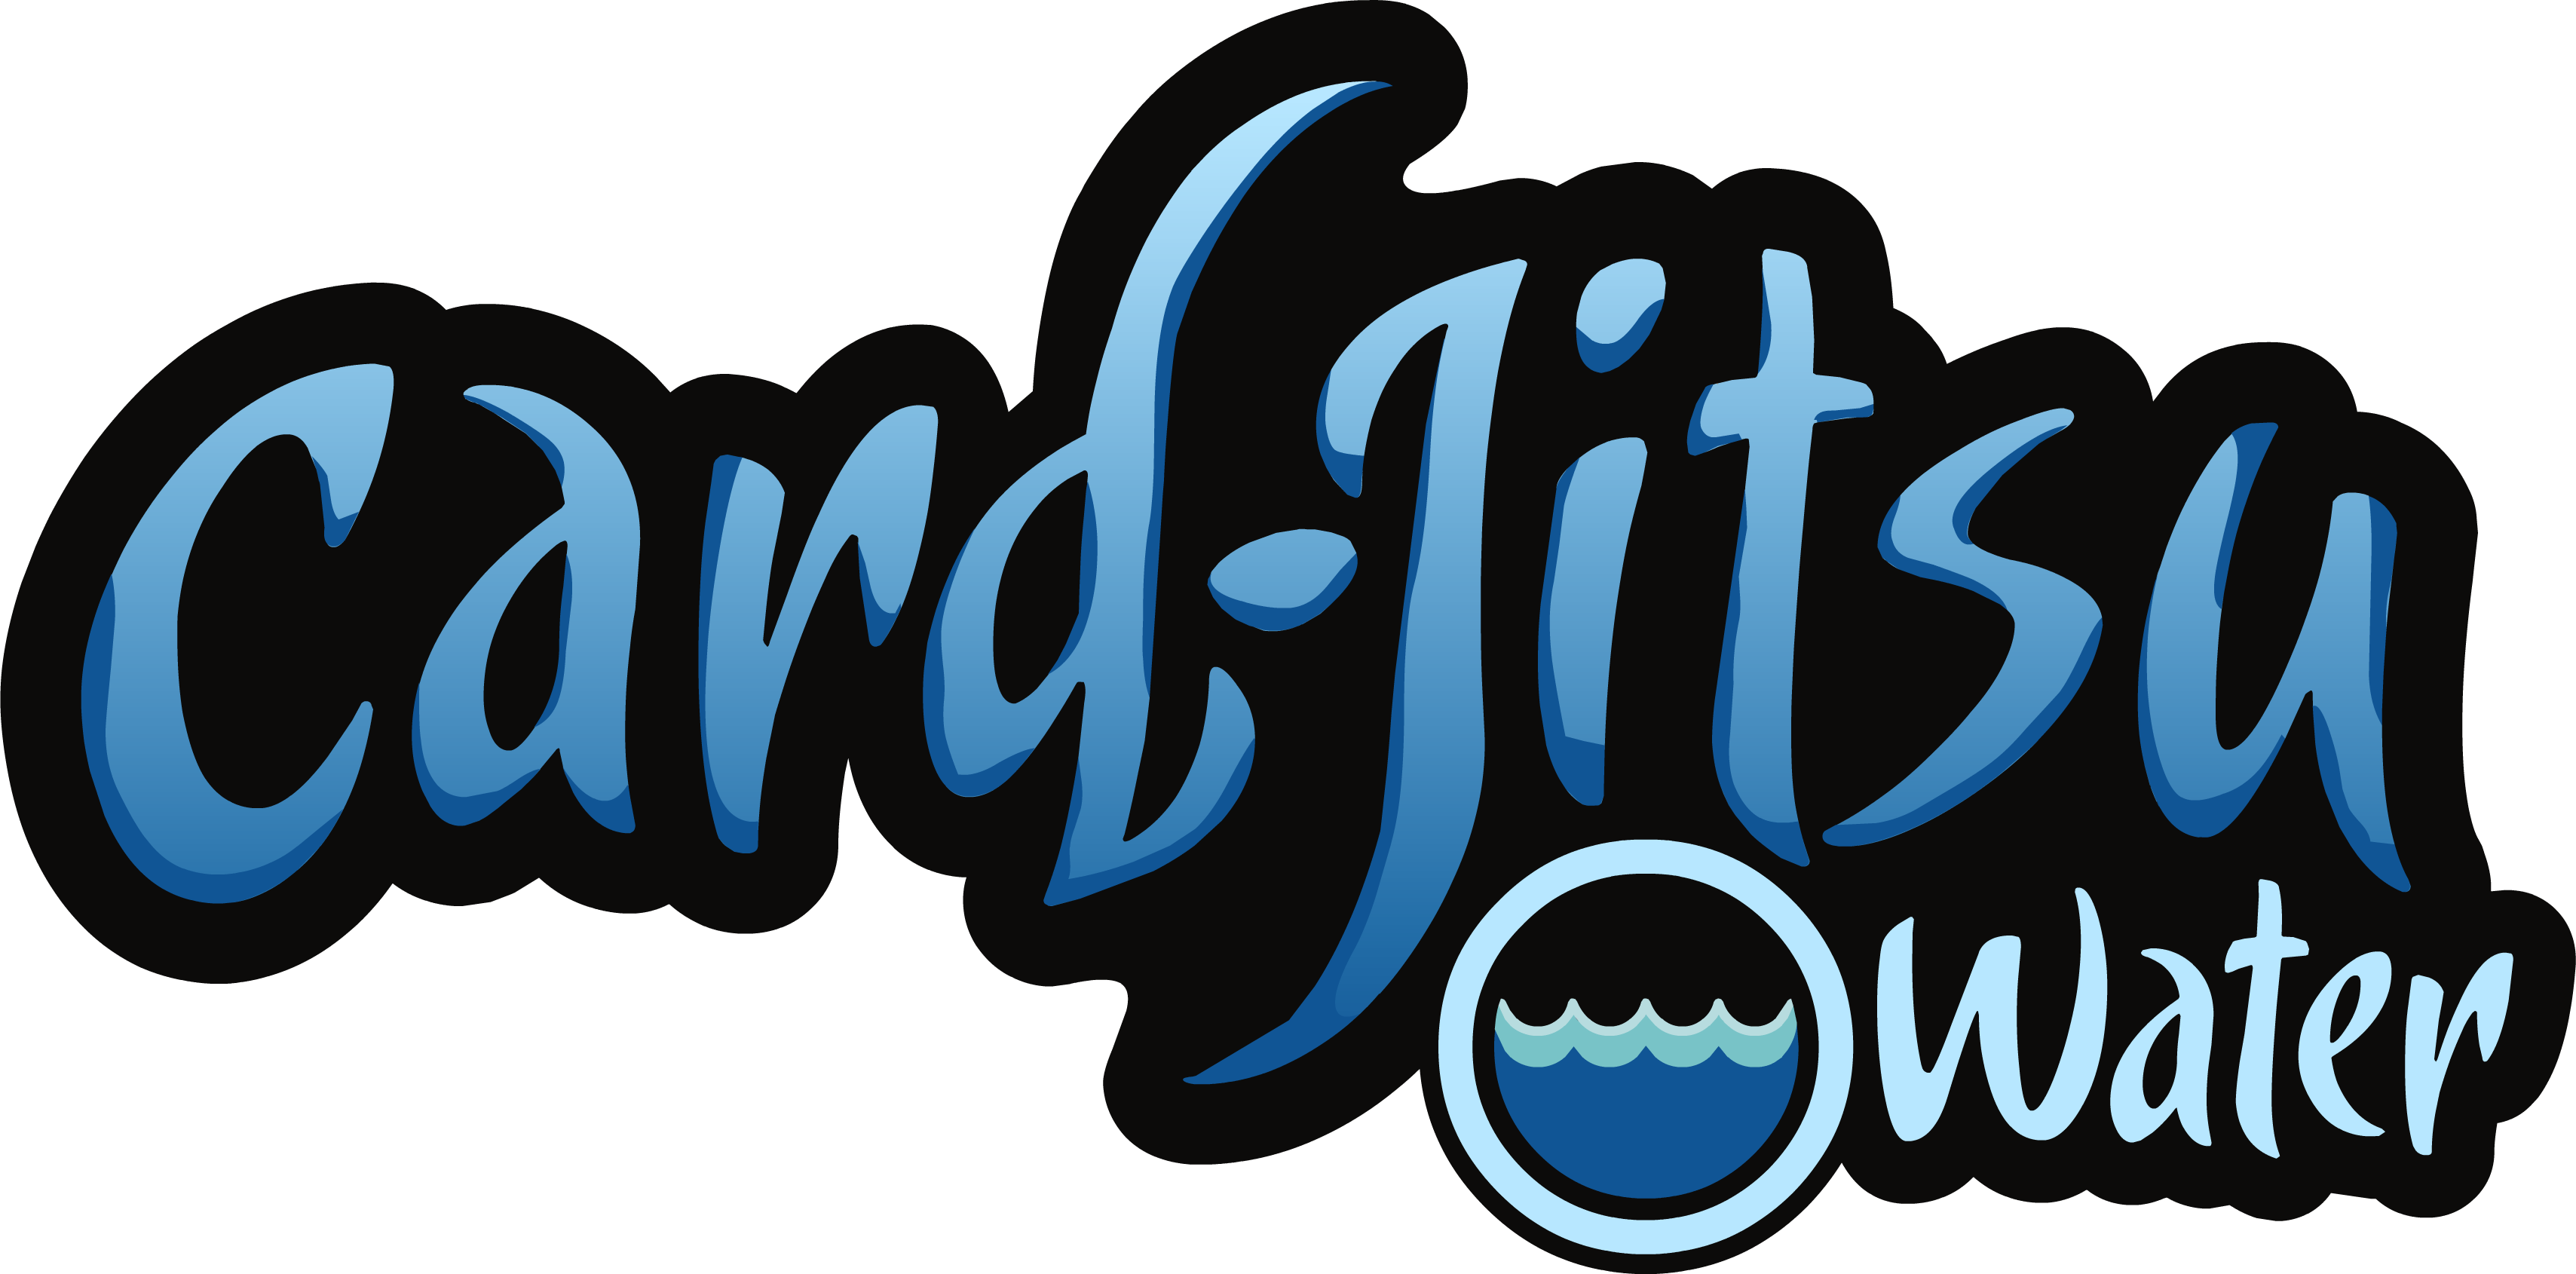 Image result for card jitsu water